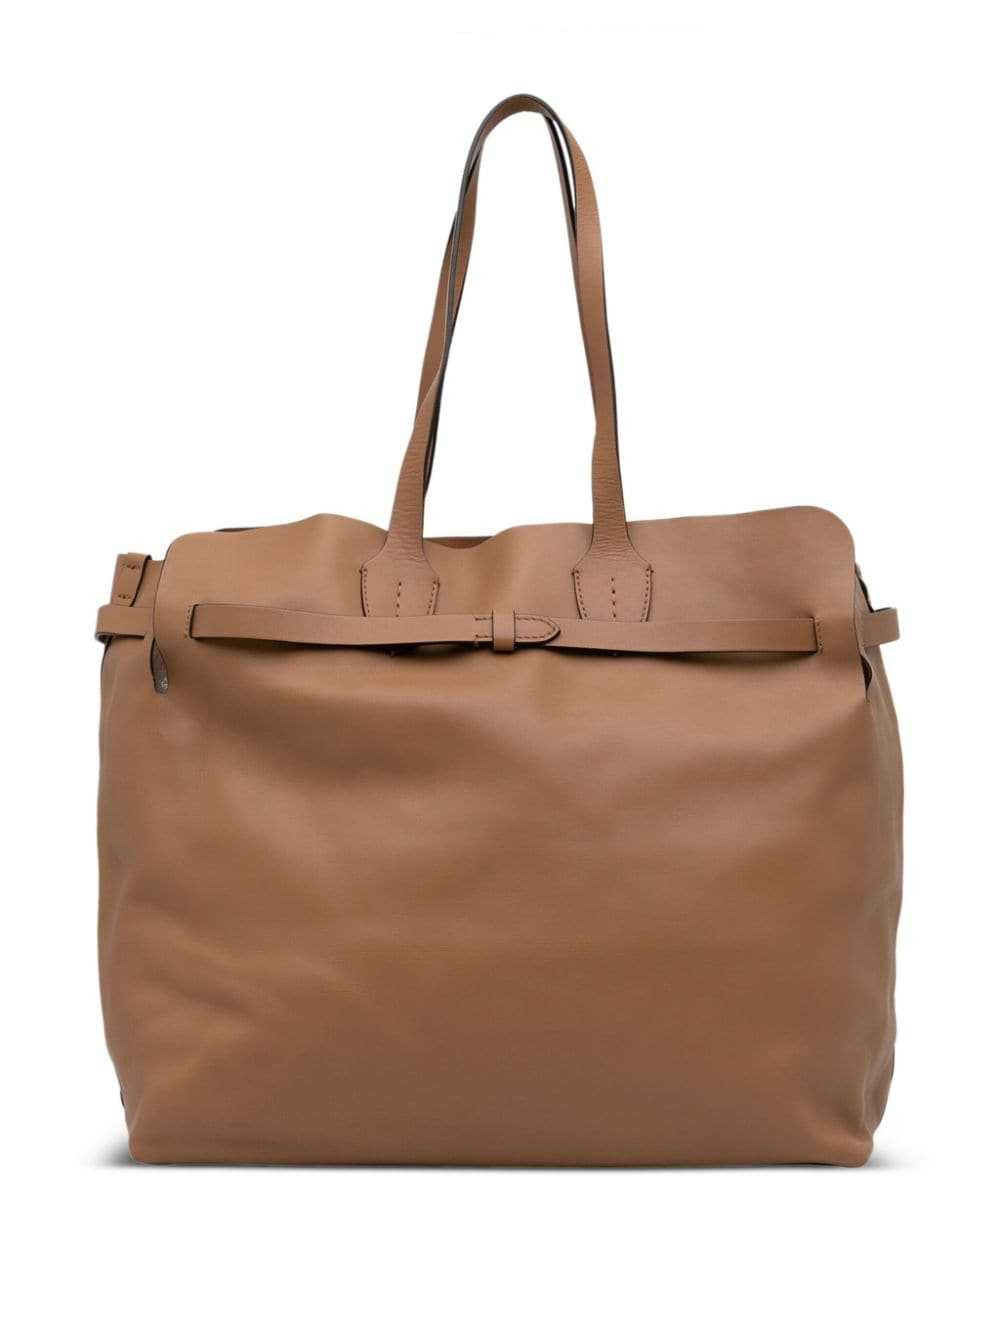 Burberry Pre-Owned Belt leather tote bag - Brown - image 2